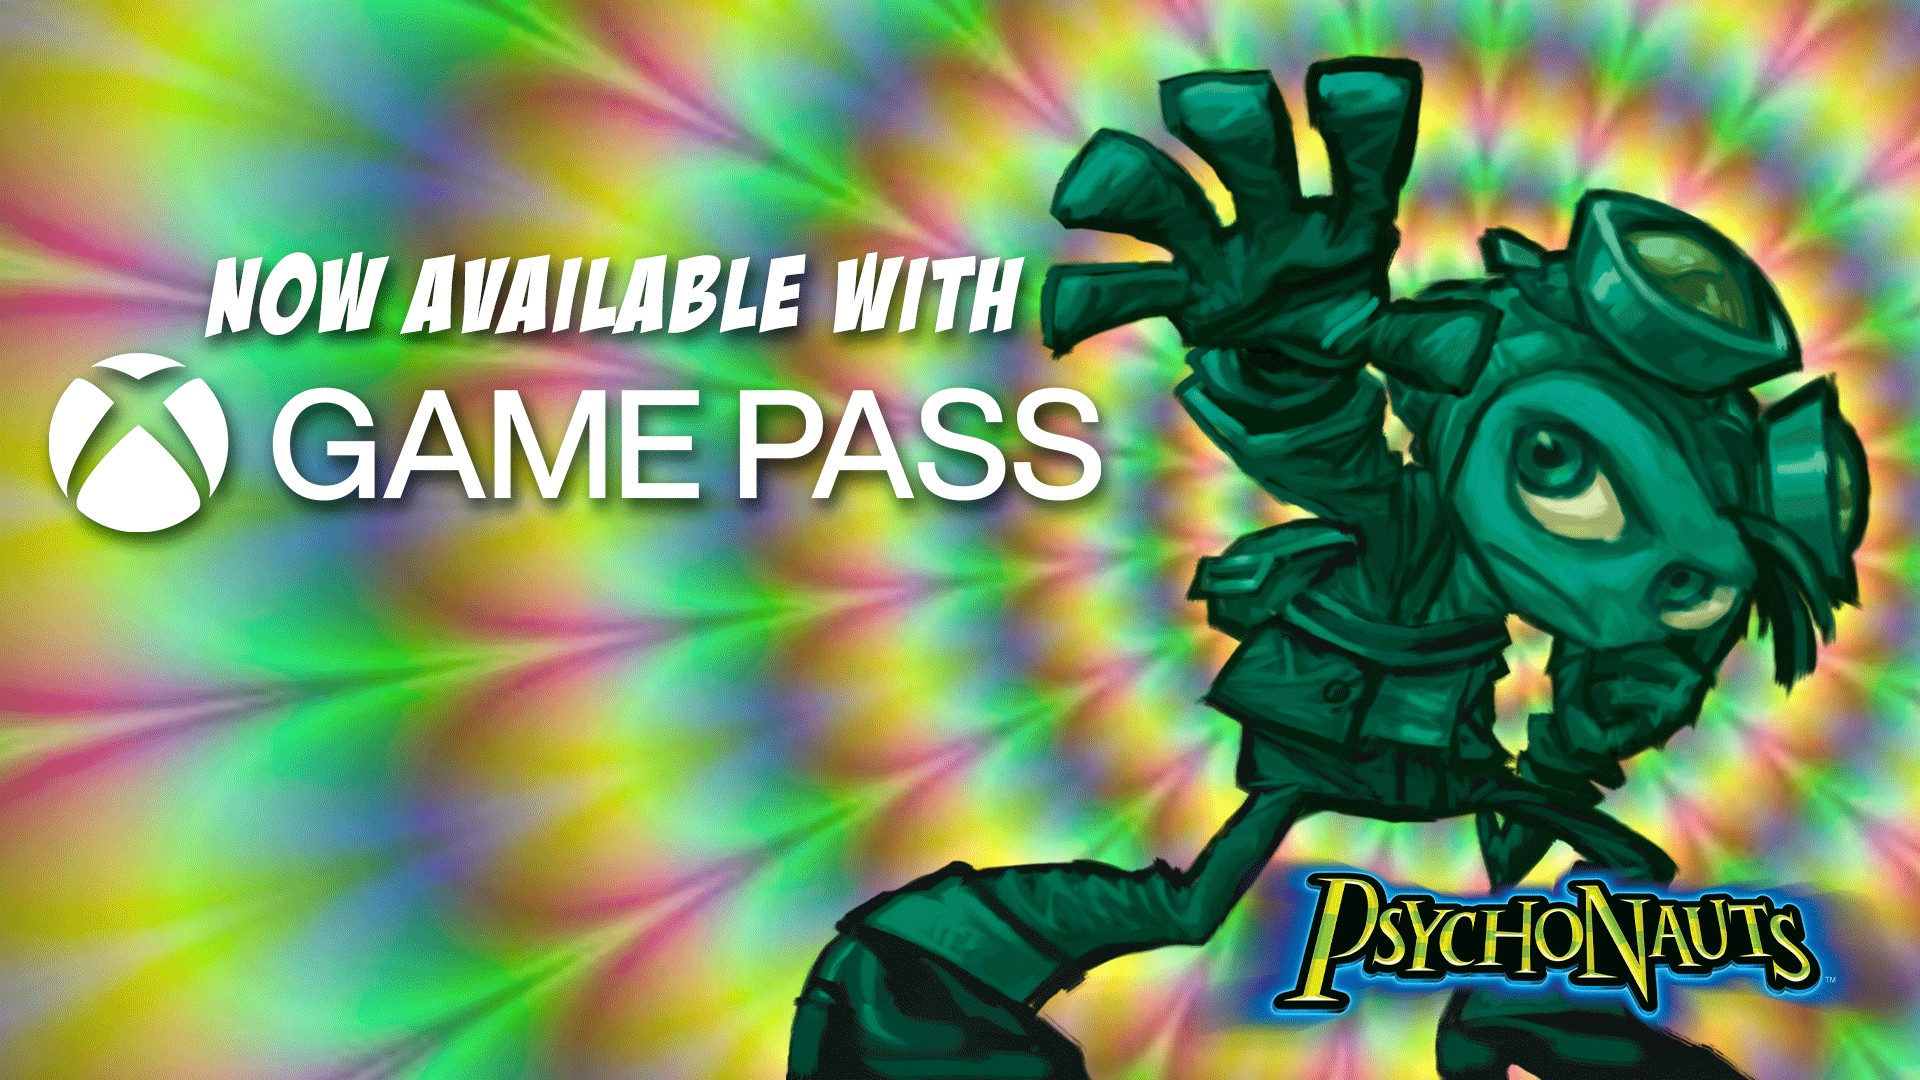 Coming Soon to Xbox Game Pass: Psychonauts 2, Humankind, Twelve Minutes,  and More - Xbox Wire